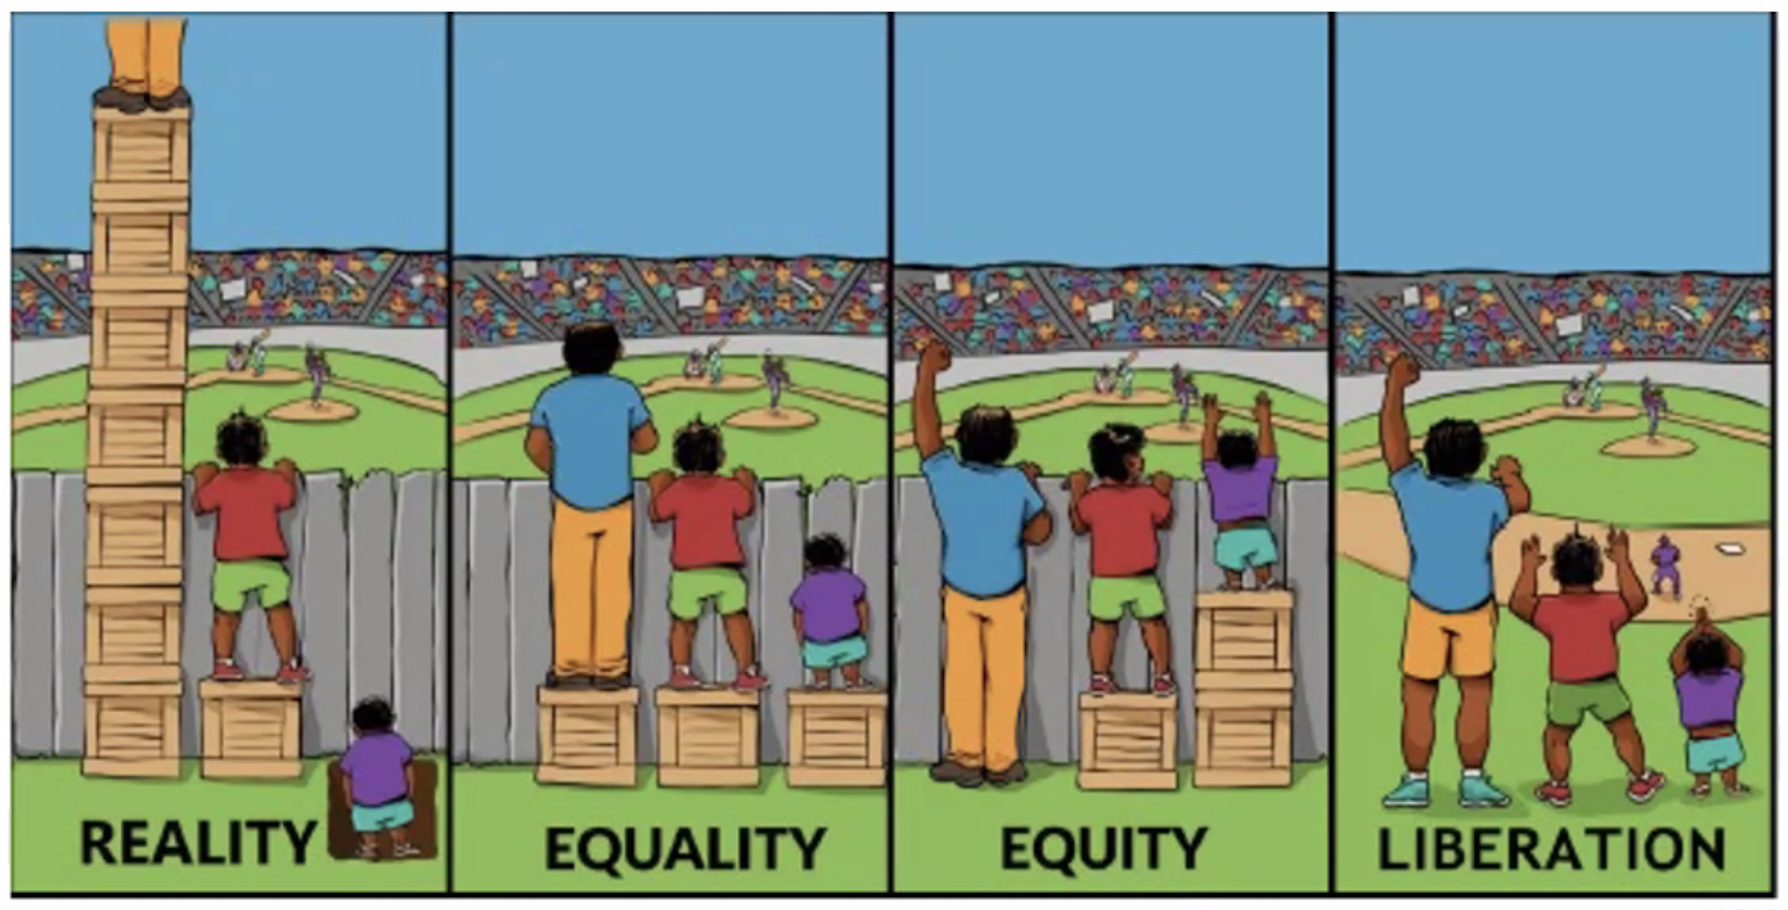 image with 4 sections illustrating reality, equality, equity and liberation